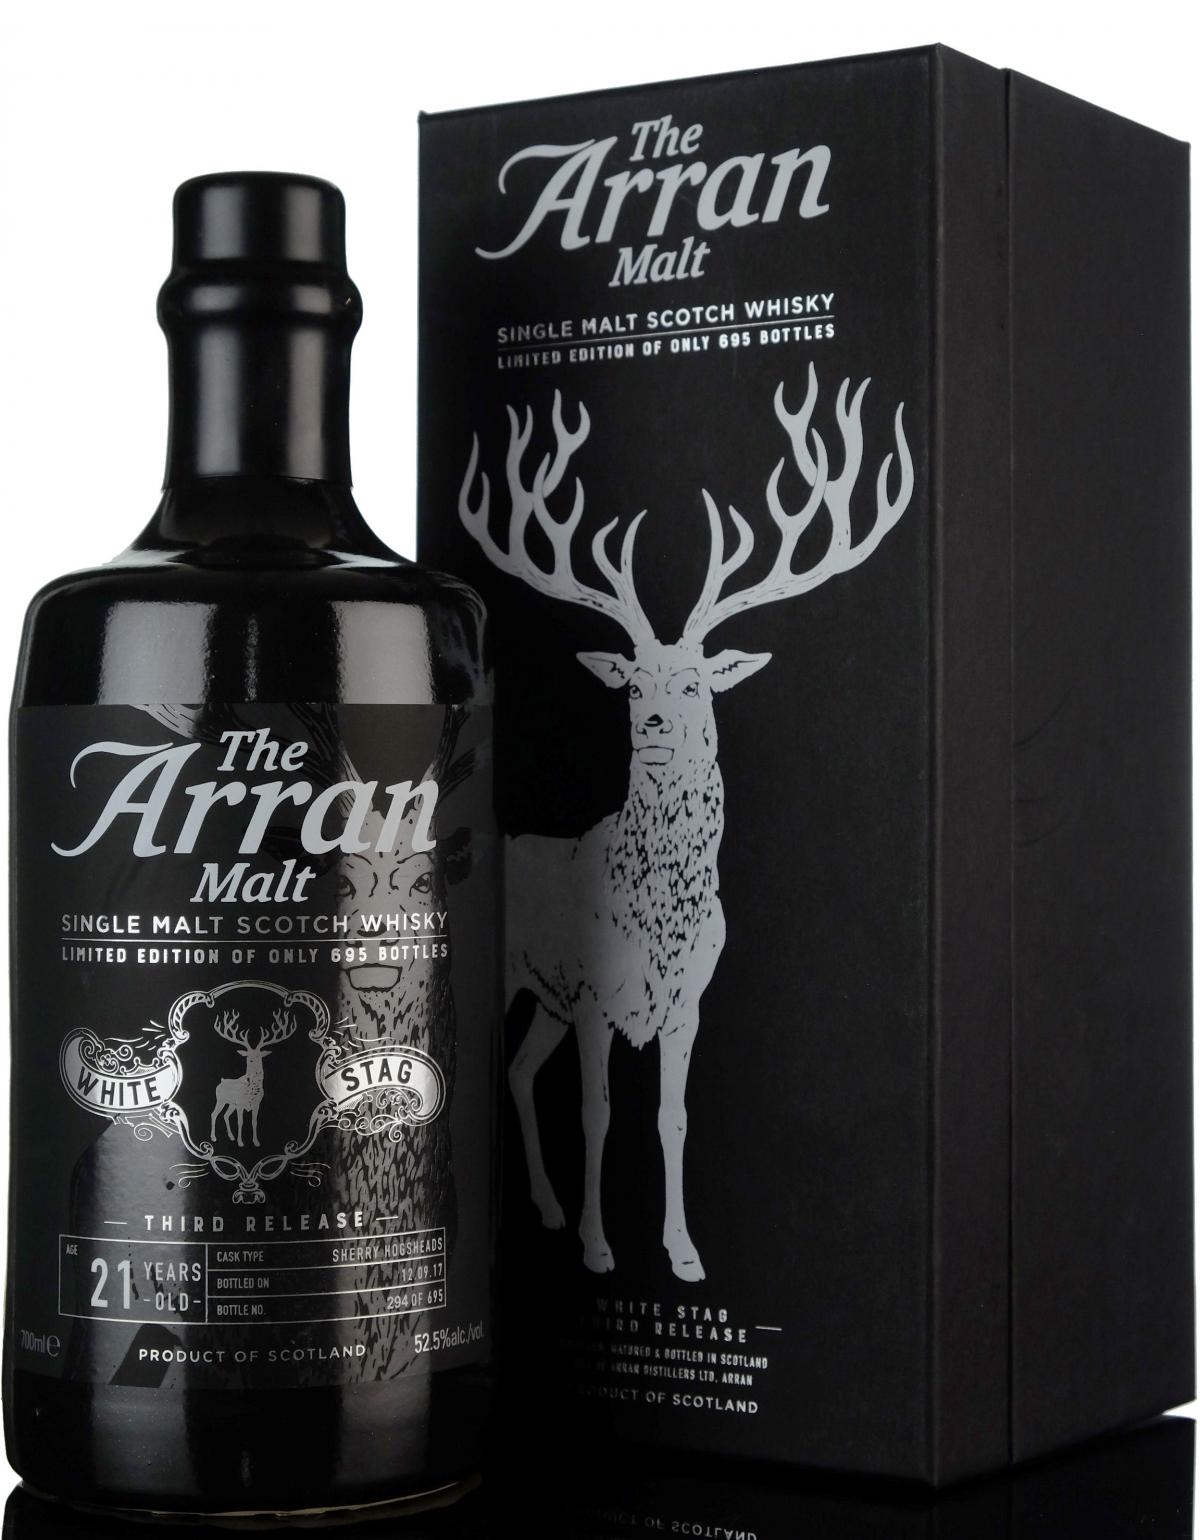 Arran 21 Year Old - White Stag - Third Release